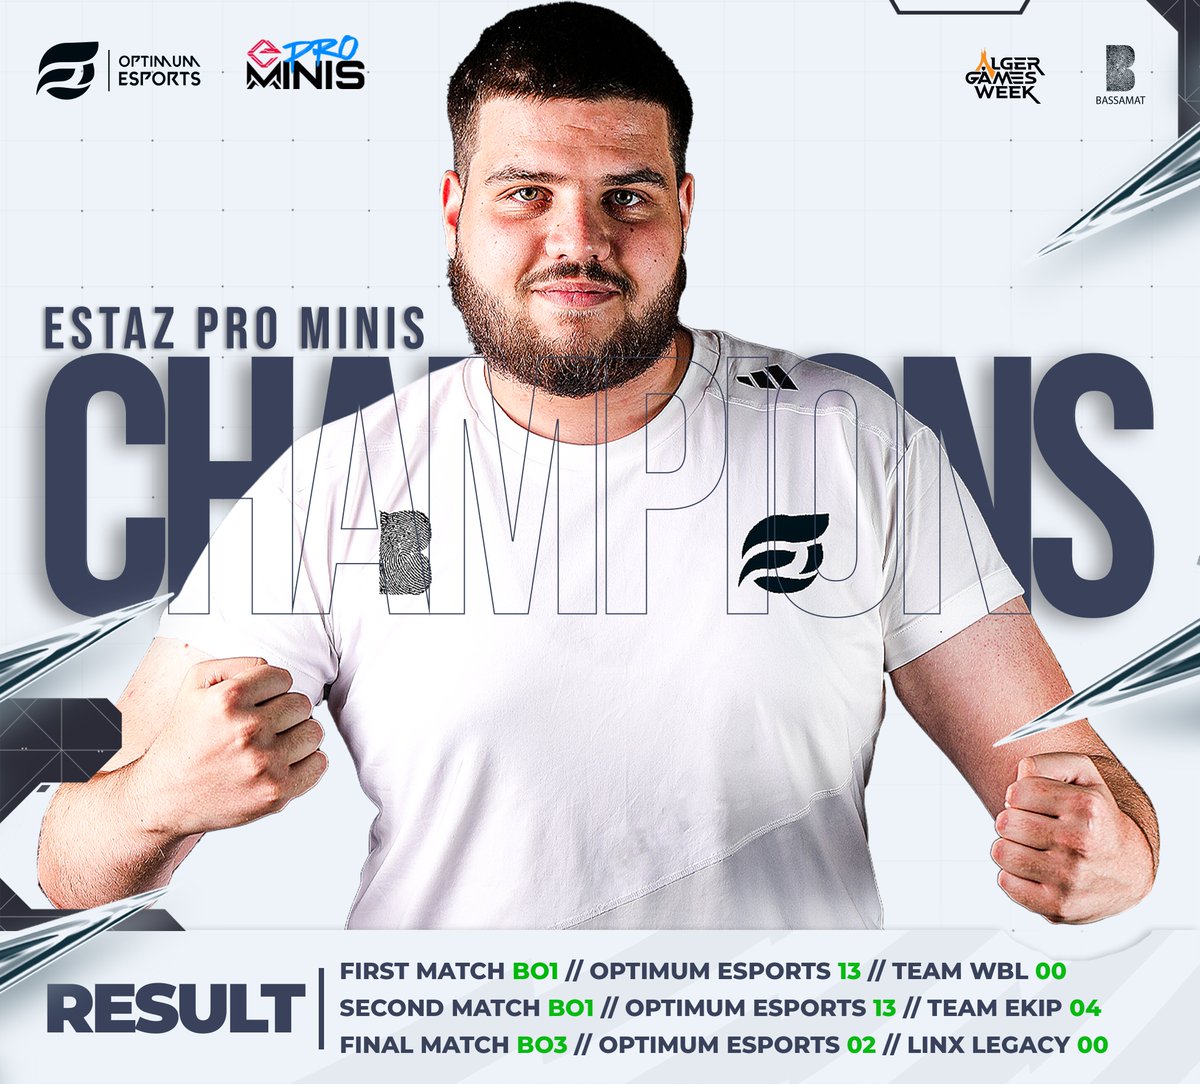 Victorious at Estaz Mini Pro Tournament in Valorant!
 Witness our extraordinary teamwork and precision as we claim the championship title! 
Thanks to our amazing players and supportive fans – we did it together! 
#ValorantChampions #EstazMiniPro #TeamworkWins #VictoryInValorant